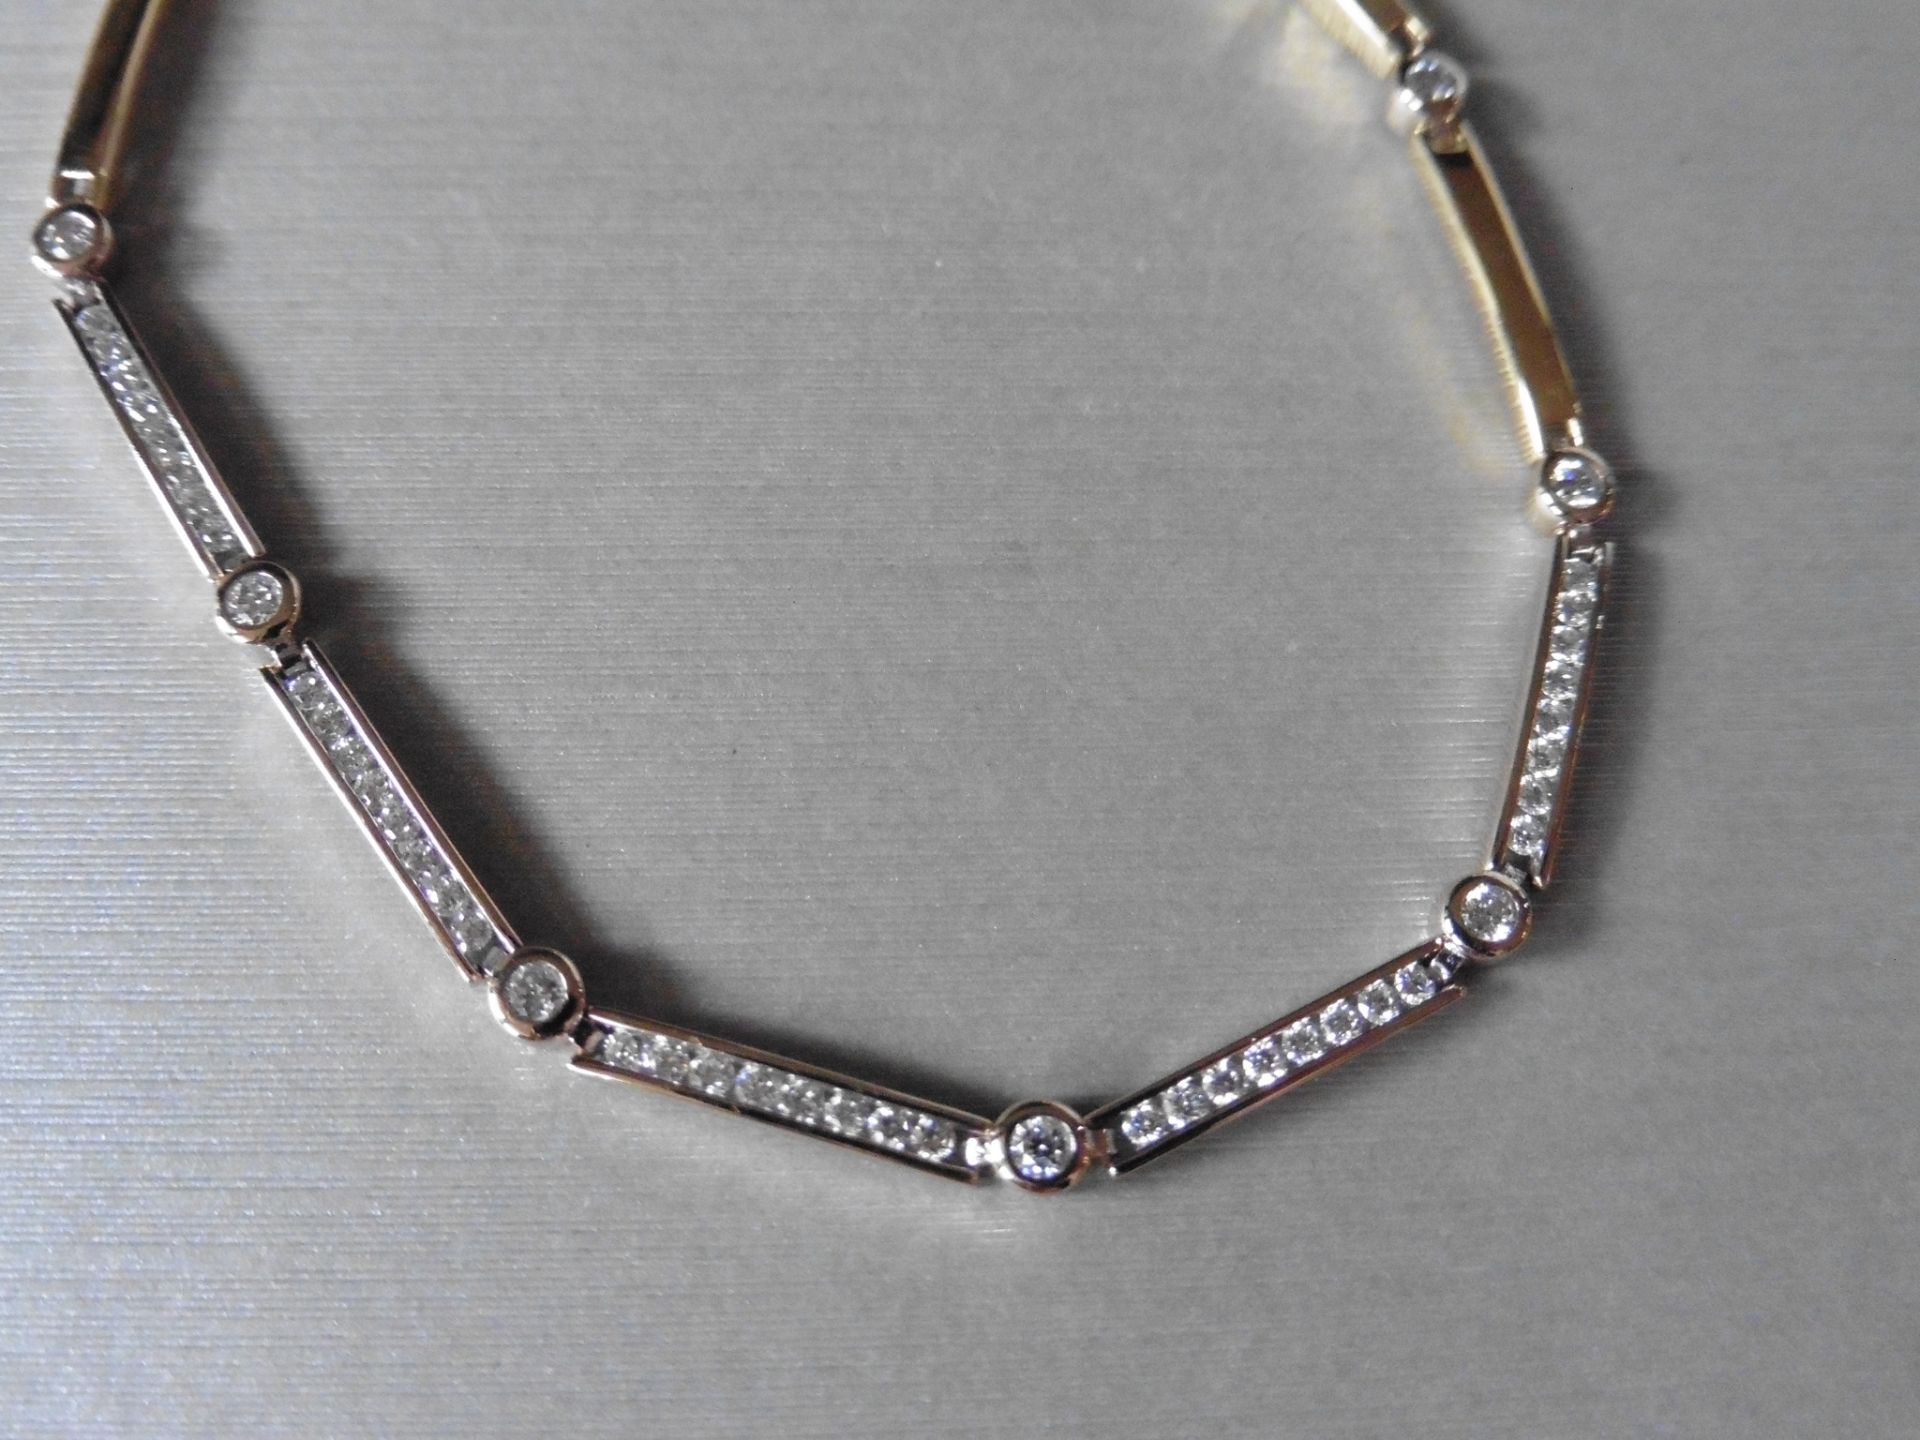 18ct gold fancy diamond bracelet. Set in white gold with yellow gold sections. Diamonds are H/I